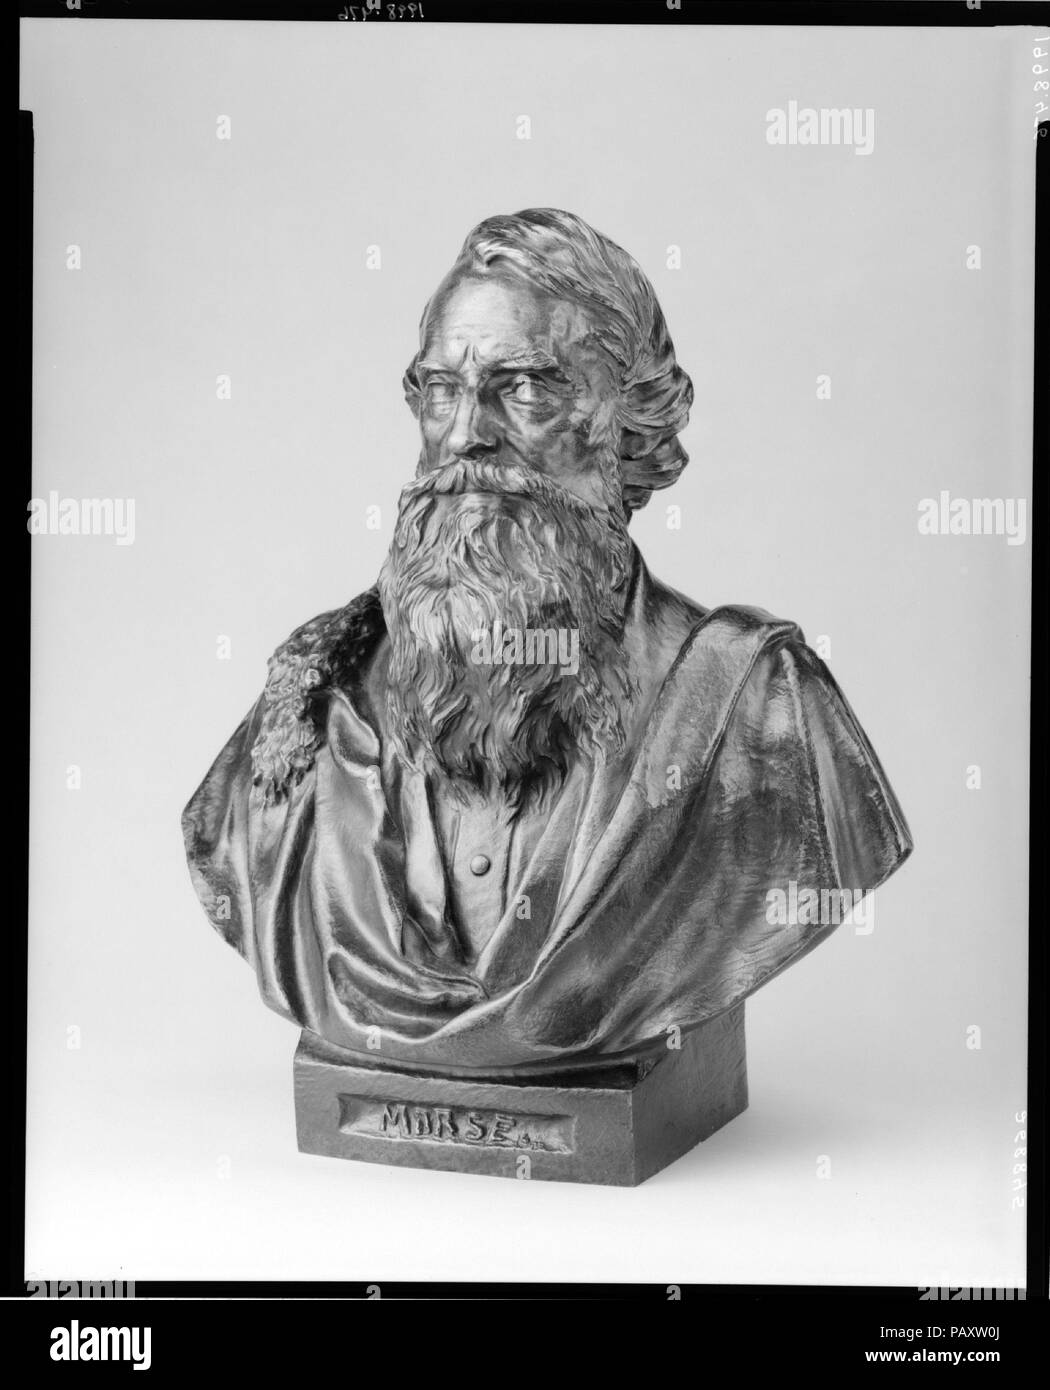 Samuel F. B. Morse. Artist: Byron M. Pickett (ca. 1834-1907). Dimensions: 15 1/2 x 12 3/4 x 9 3/8 in. (39.4 x 32.4 x 23.8 cm). Date: ca. 1870.  Pickett's bust-length portrait of Morse is related to his over-lifesize bronze statue of the artist-inventor, dedicated in 1871 in Central Park. The elderly bearded Morse is portrayed in contemporary dress with cloaked shoulders. His drape and unincised pupils are typical neoclassical portrait devices that persisted well into the nineteenth century. This blend of realism and classicism exemplifies the portrait style favored by such other New York-based Stock Photo